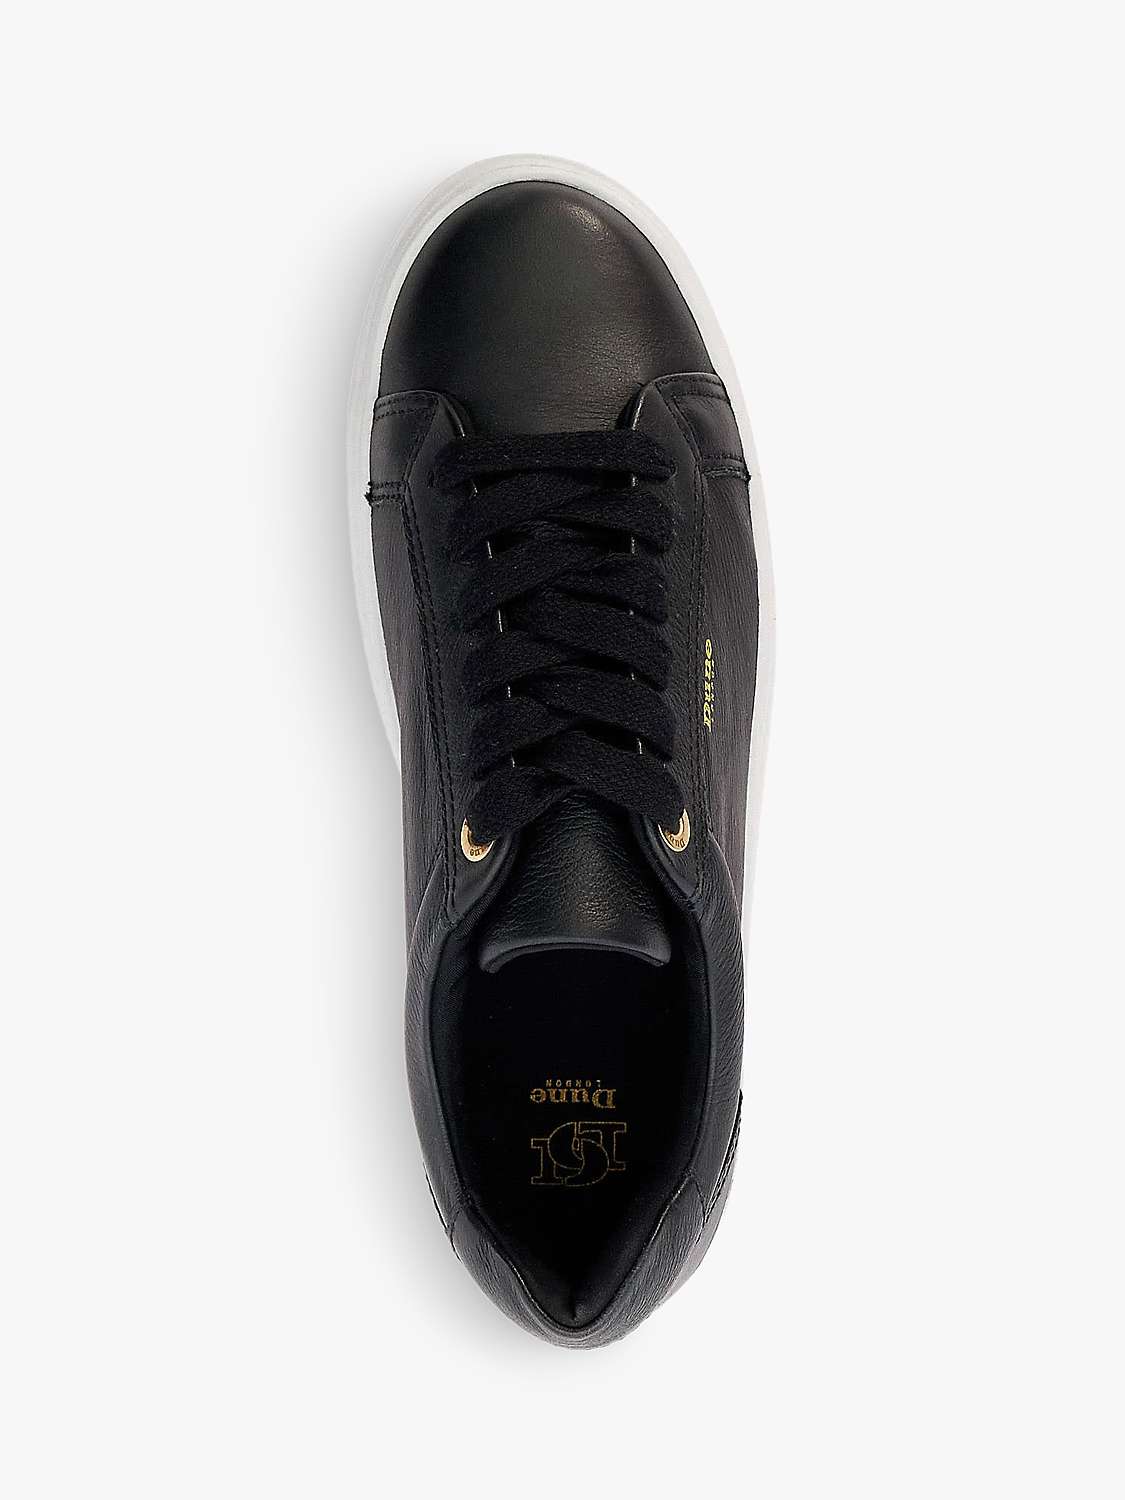 Buy Dune Eastern Leather Low Top Trainers, Black Online at johnlewis.com